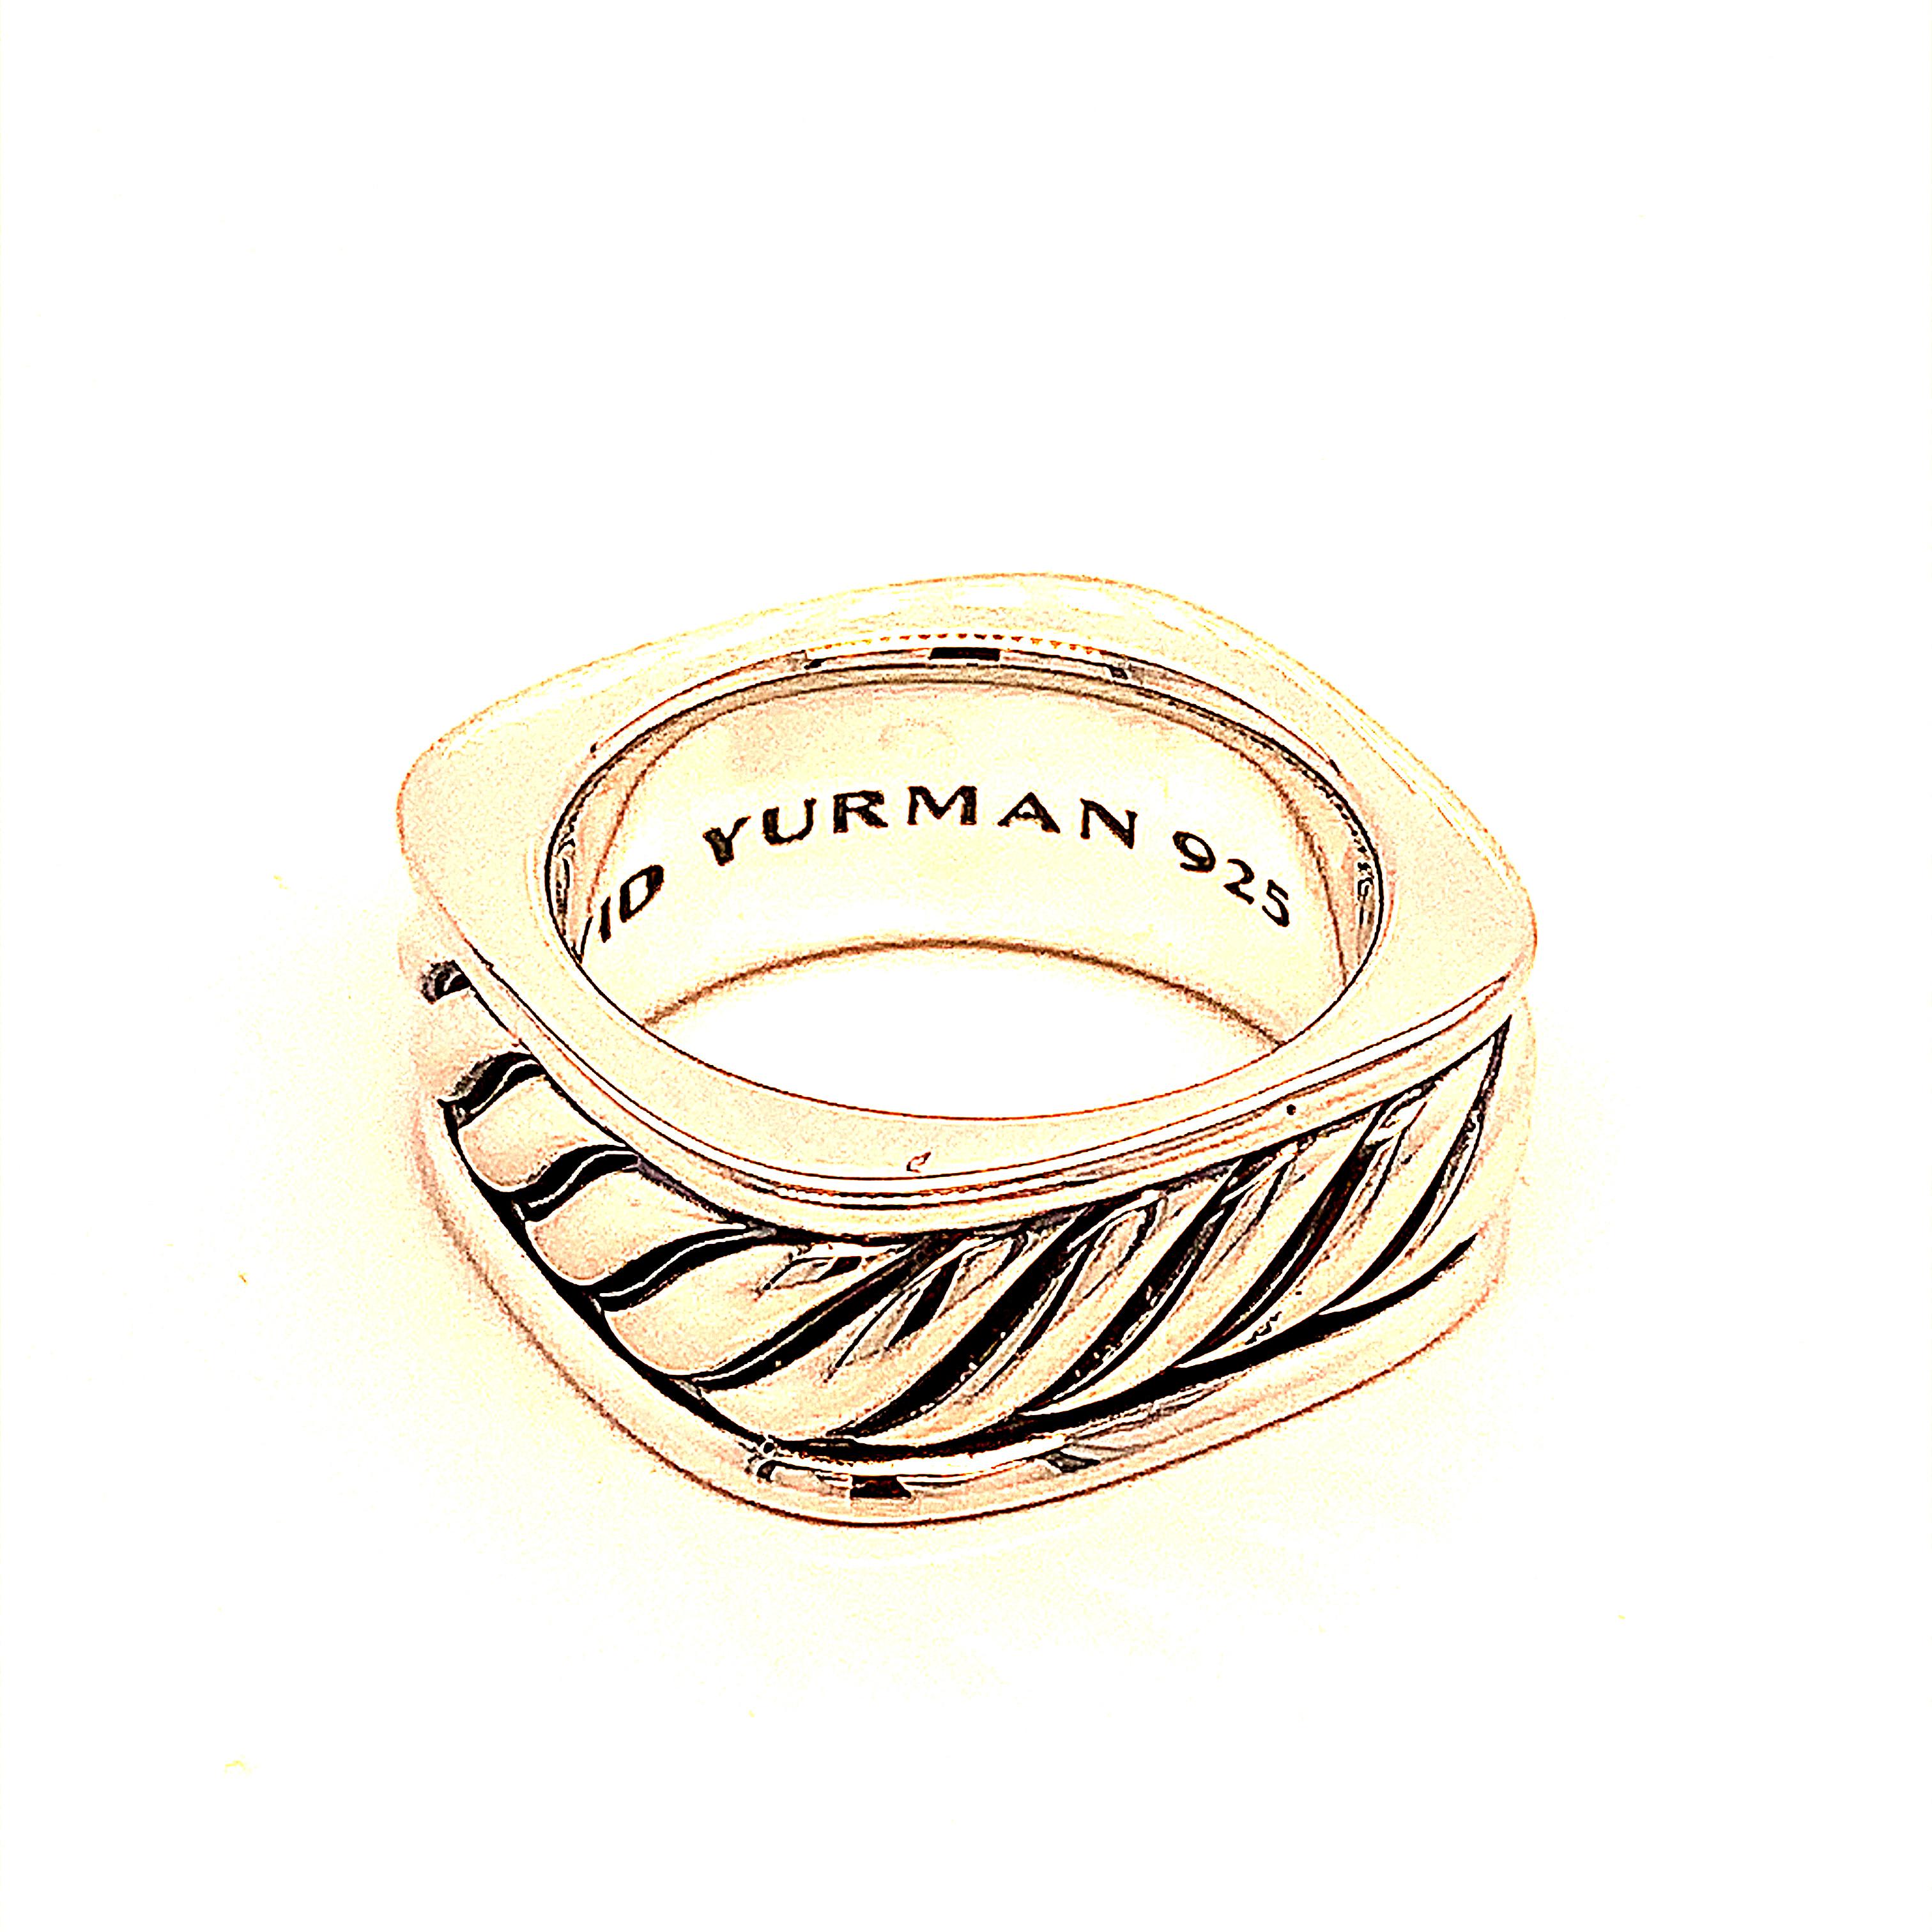 David Yurman Estate Mens Ring 7.5 Sterling Silver DY114

Retail: $799.00

This elegant Authentic David Yurman ring is made of sterling silver and has a weight of 14.10 grams.

TRUSTED SELLER SINCE 2002

PLEASE SEE OUR HUNDREDS OF POSITIVE FEEDBACKS